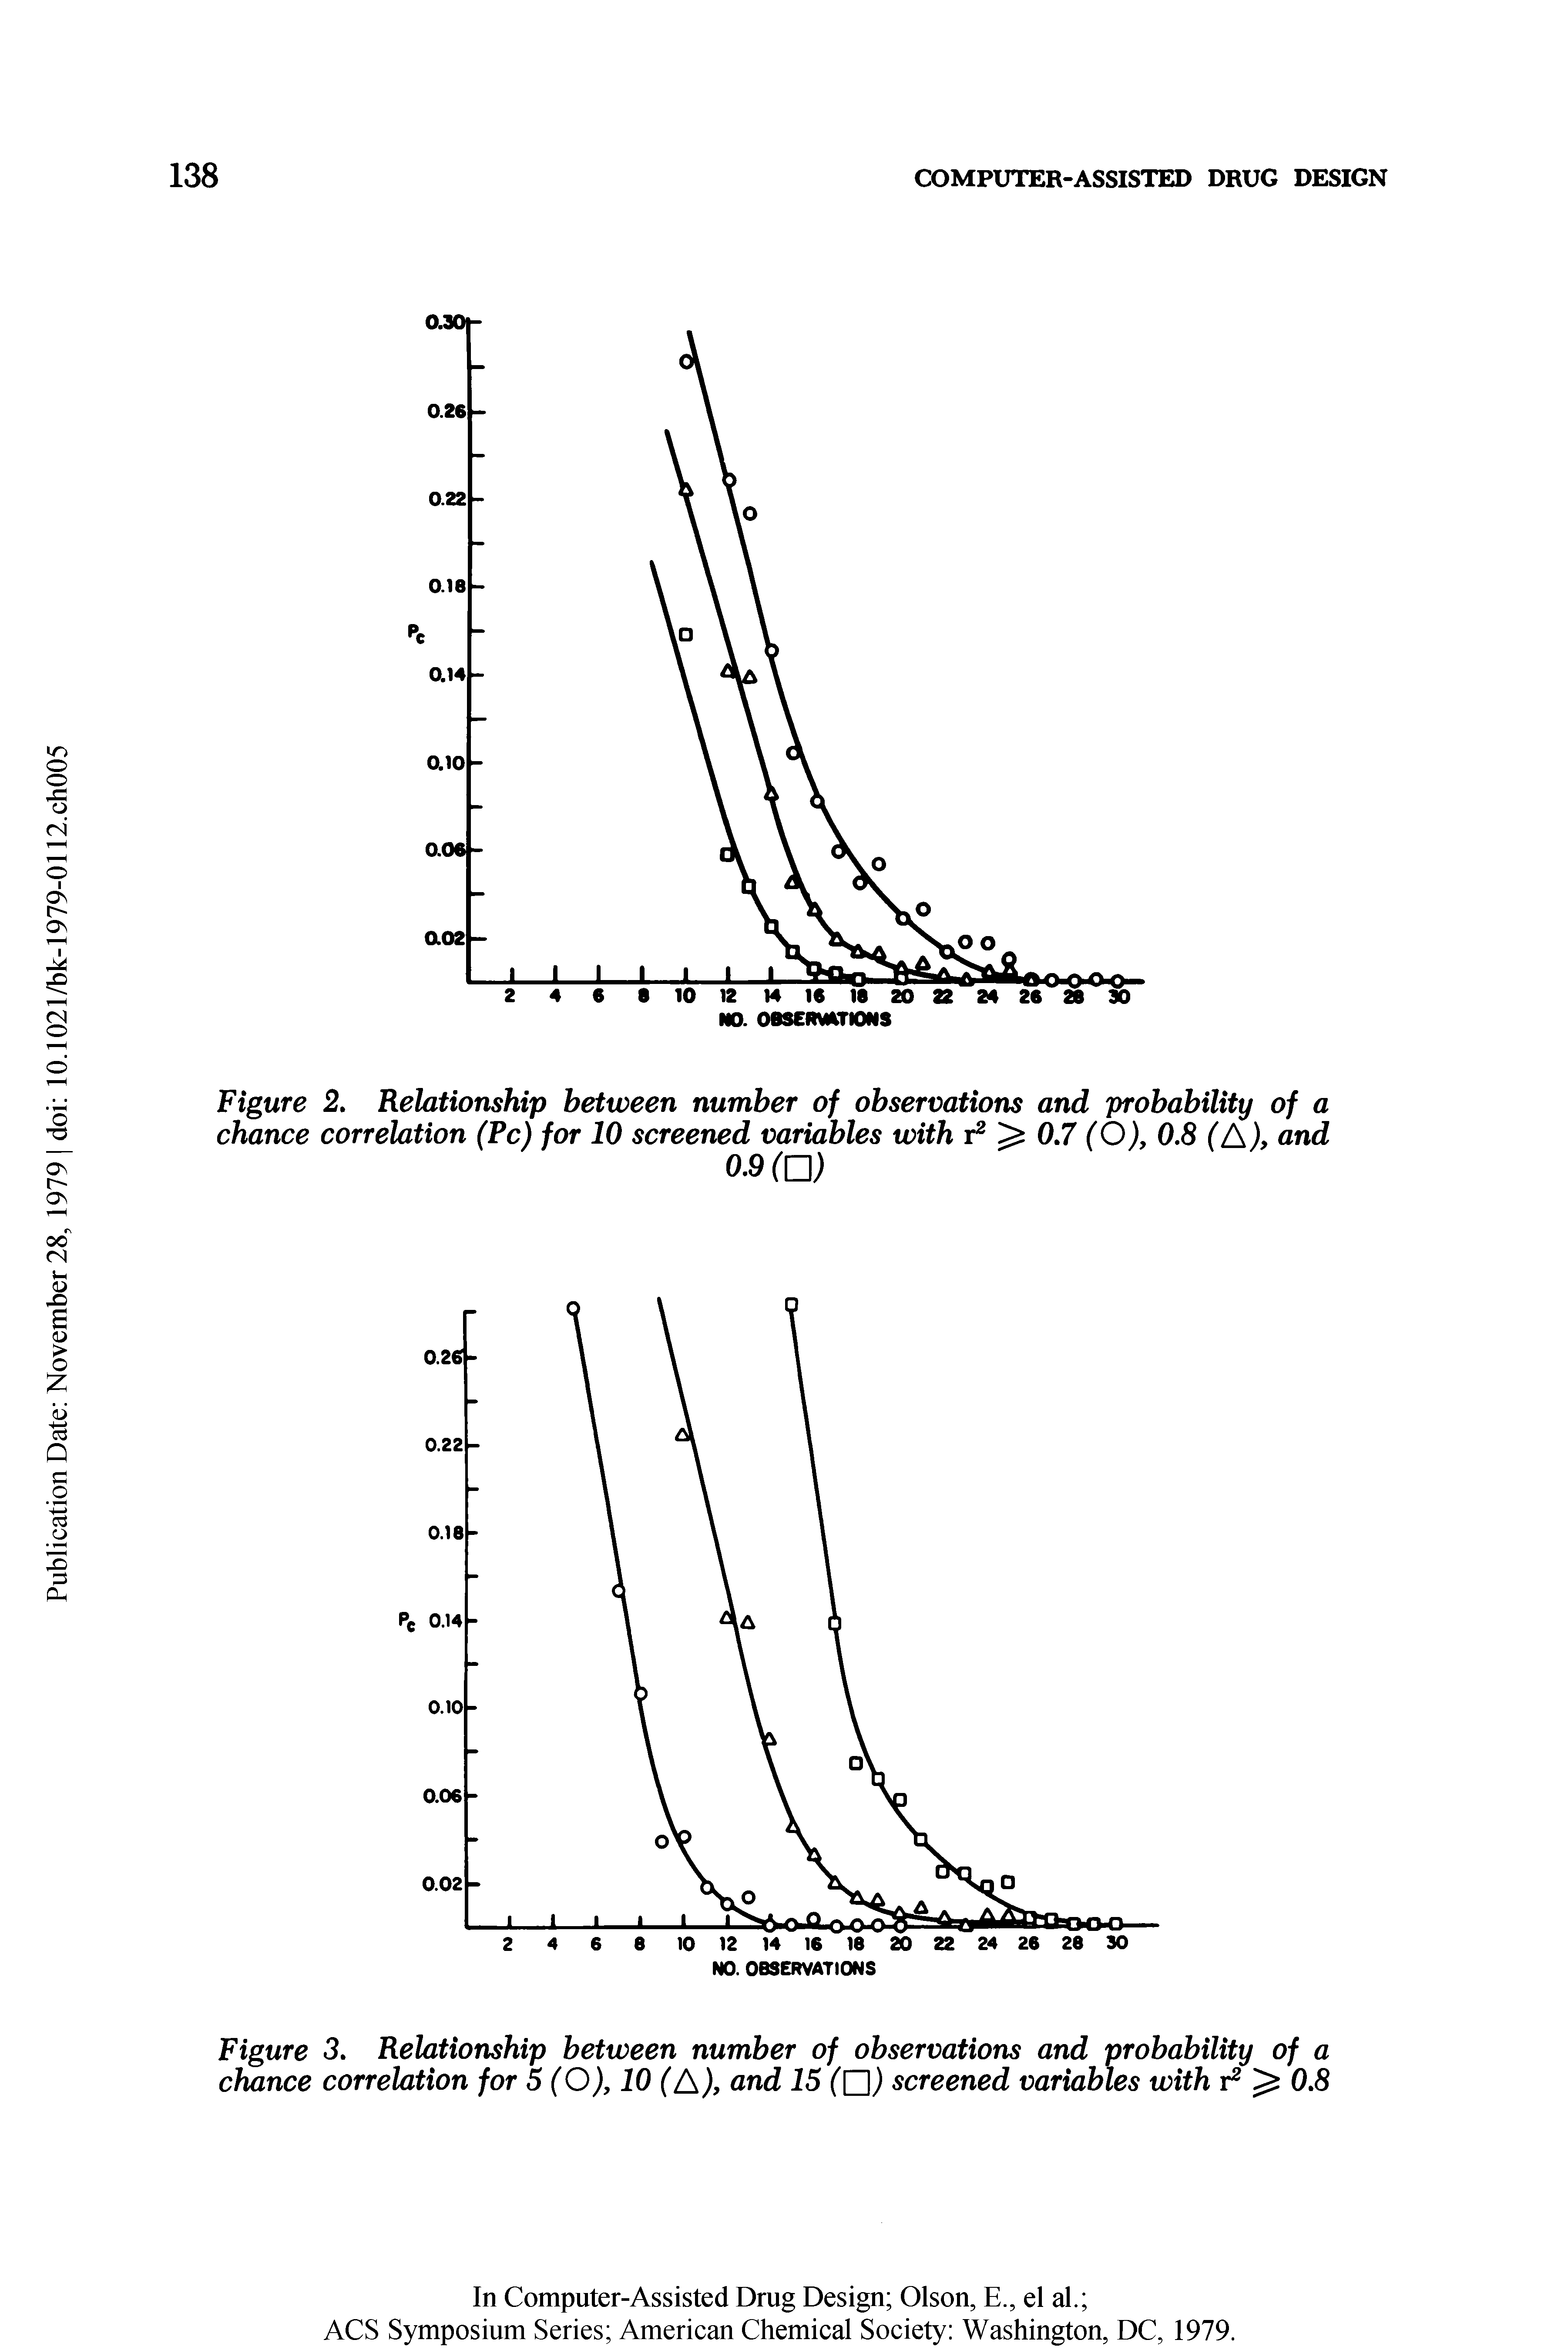 Figure 2. Relationship between number of observations and probability of a chance correlation (Pc) for 10 screened variables with r2 0.7 (O), 0.8 (A), and...